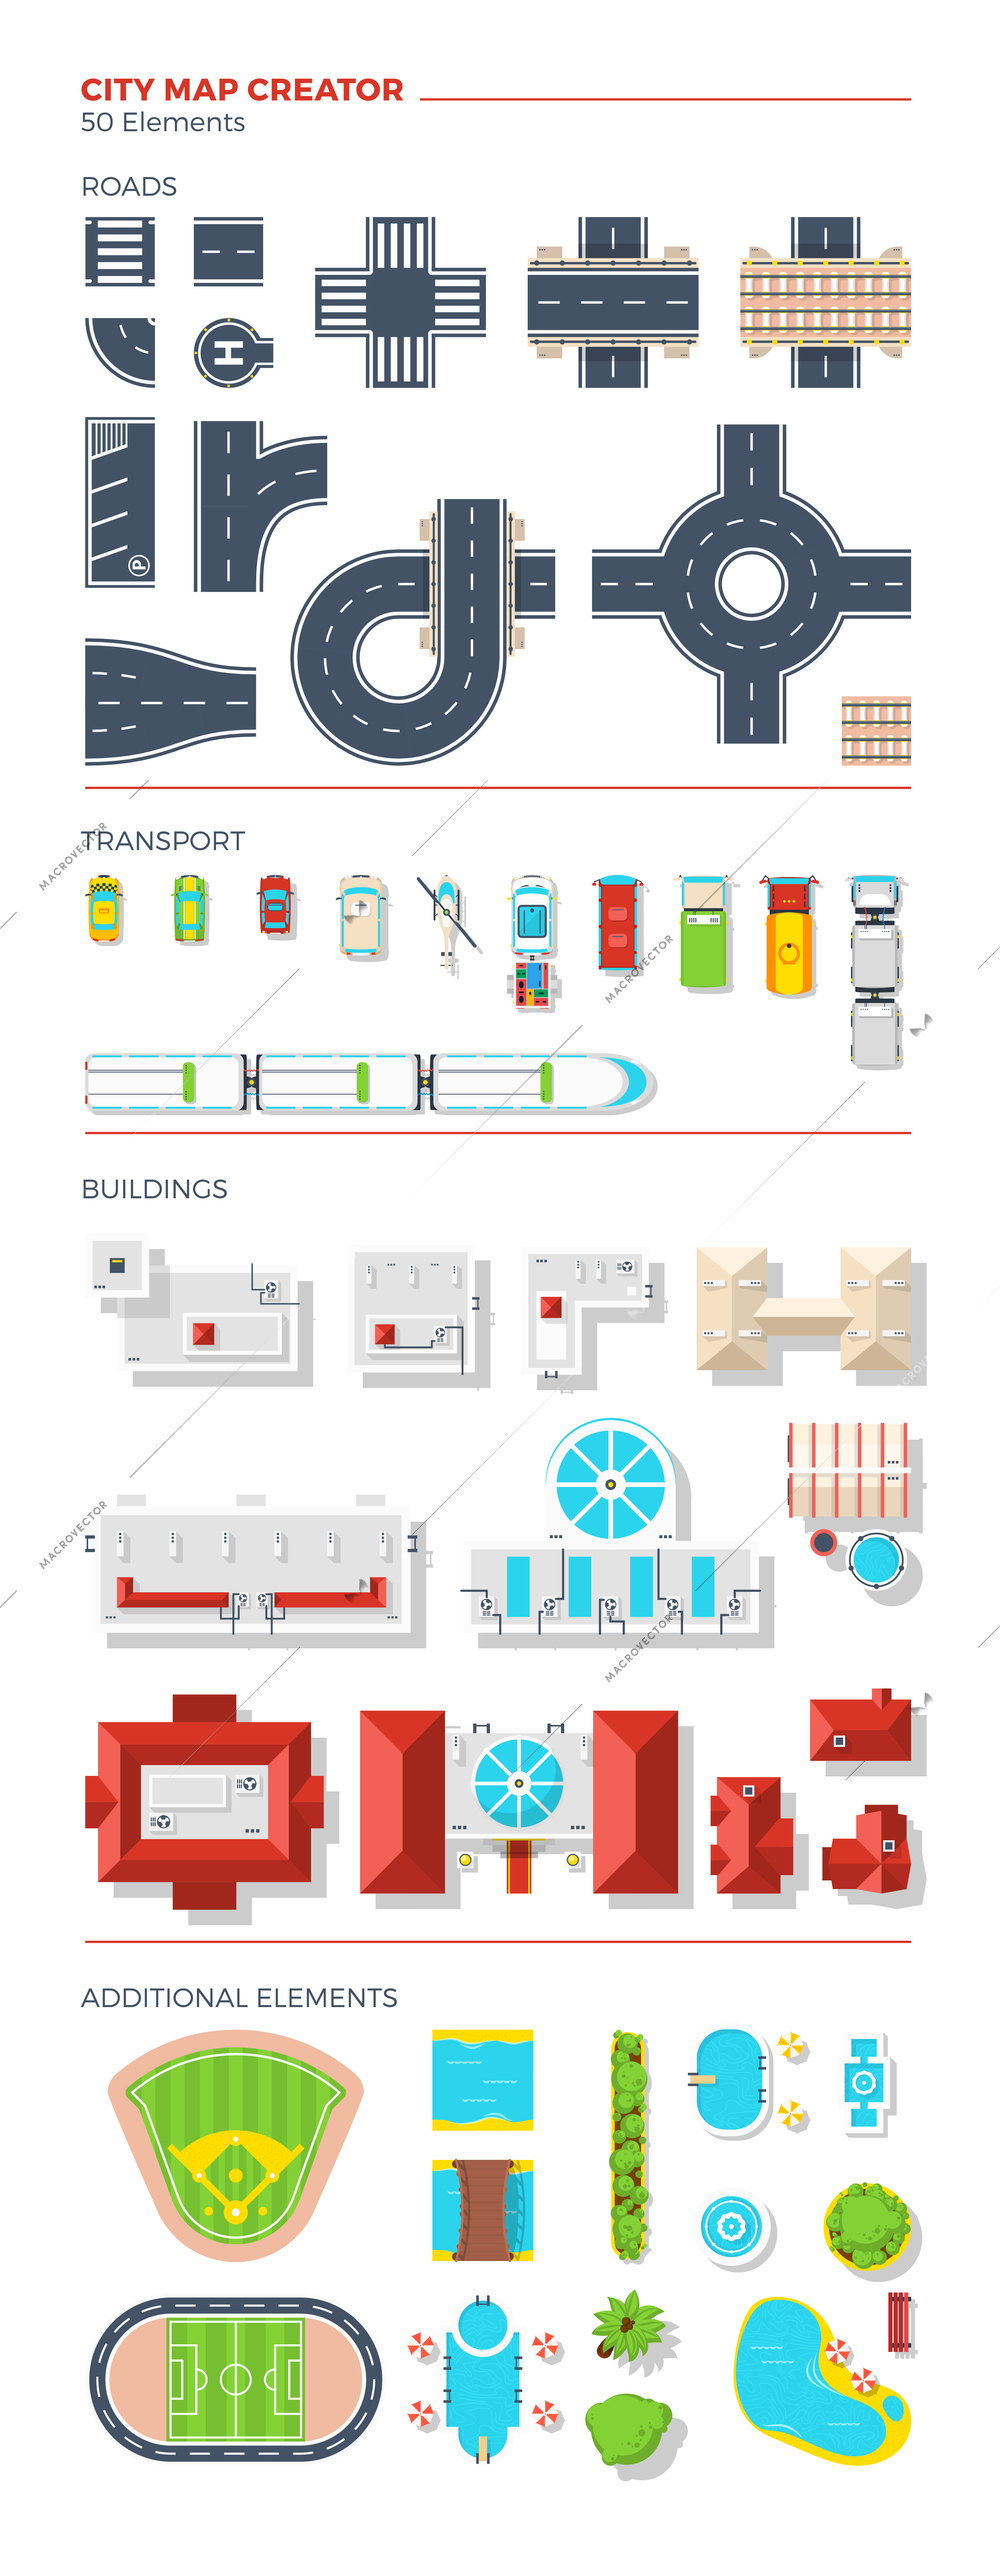 City map creator of top view elements grouped by roads transport buildings and additional objects vector illustration